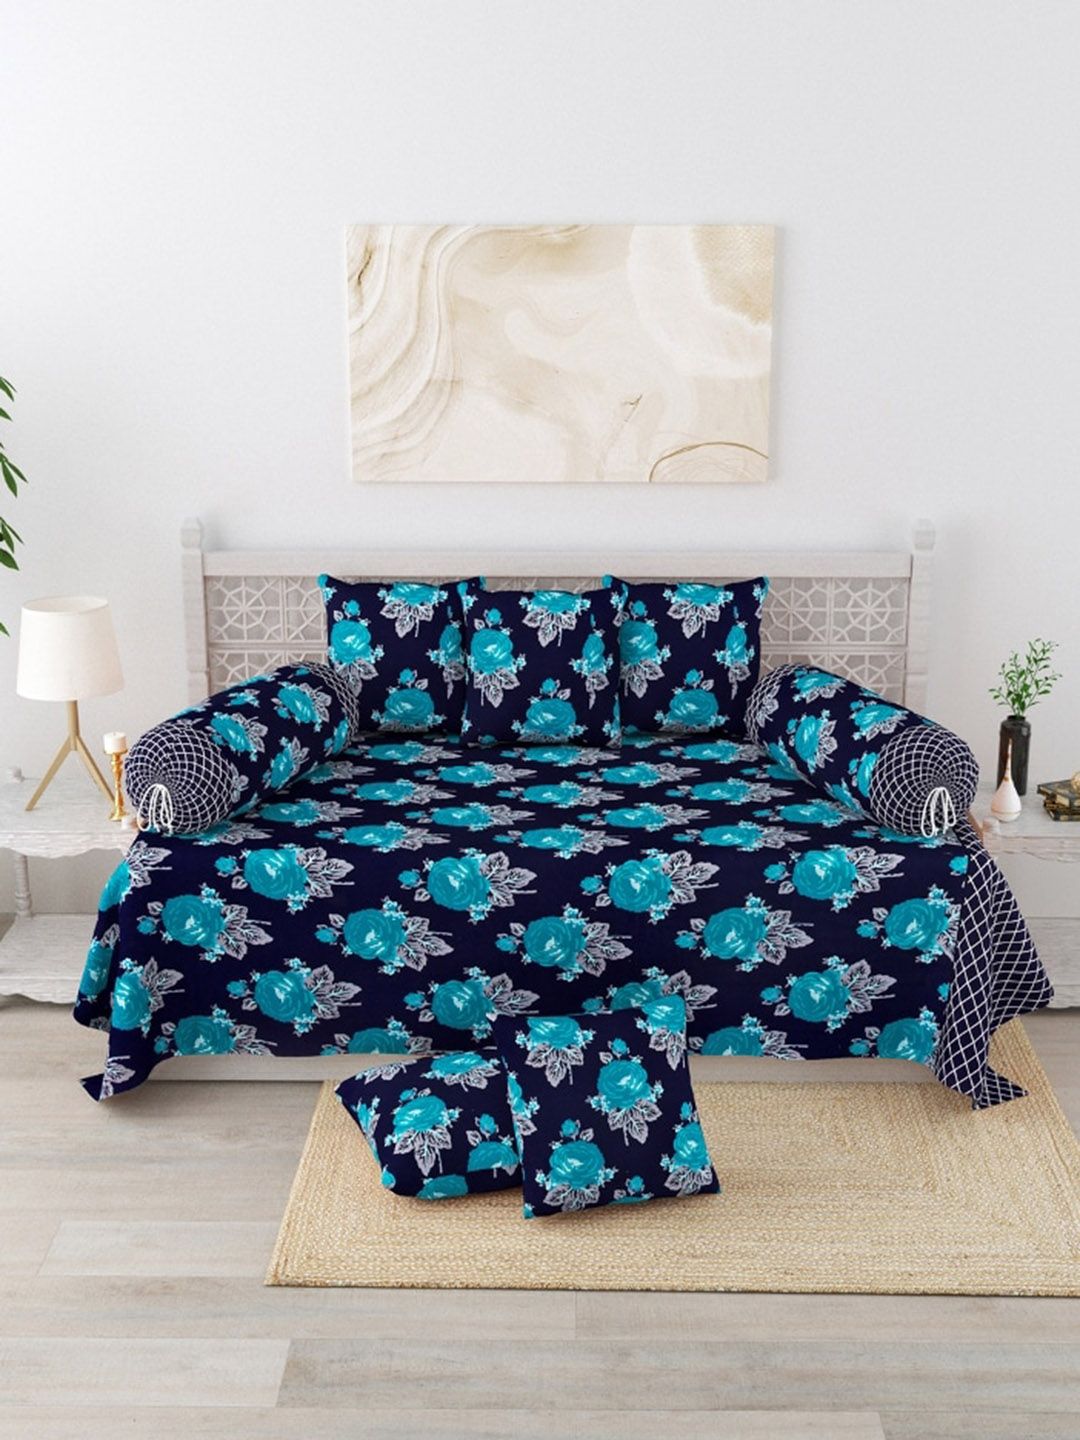 Salona Bichona Set Of 8 Blue Printed Cotton Single Bedsheet With Bolster Covers & Cushion Covers Price in India